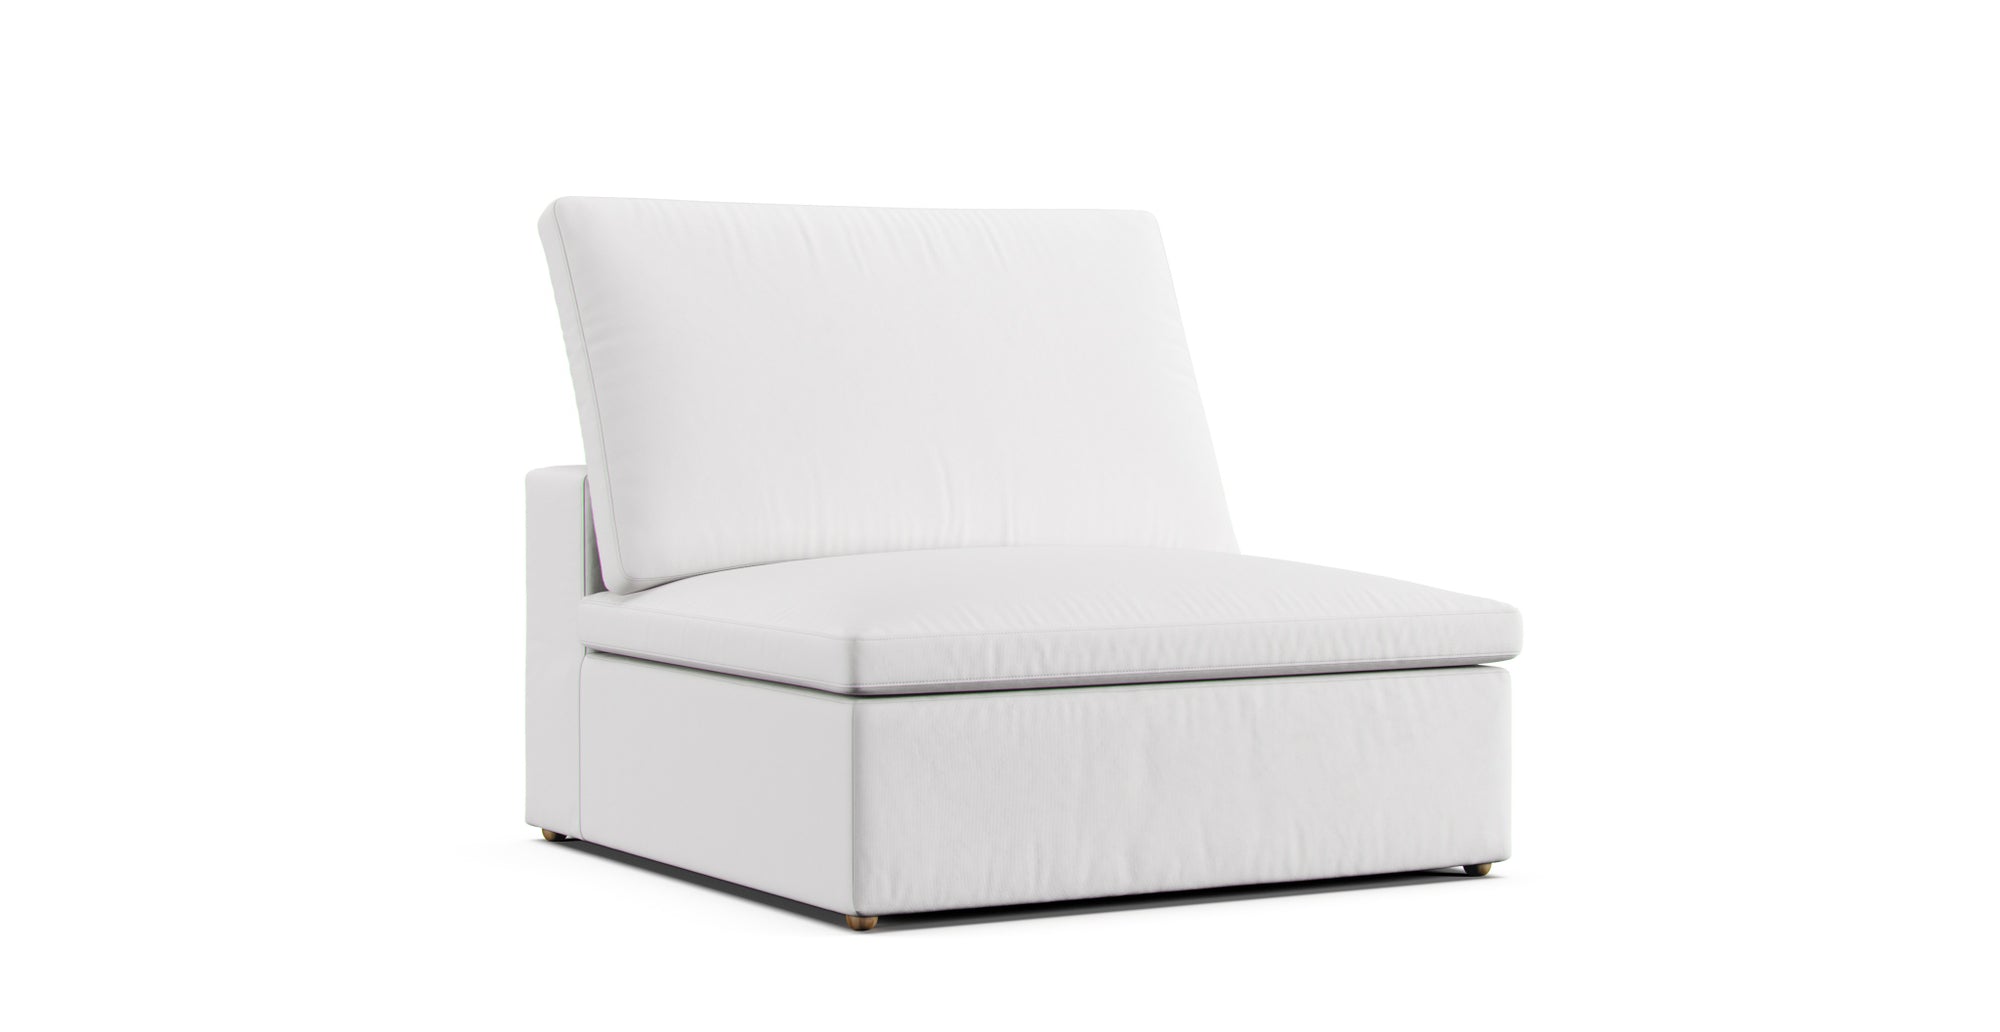 Replacement sofa covers for Restoration Hardware Cloud